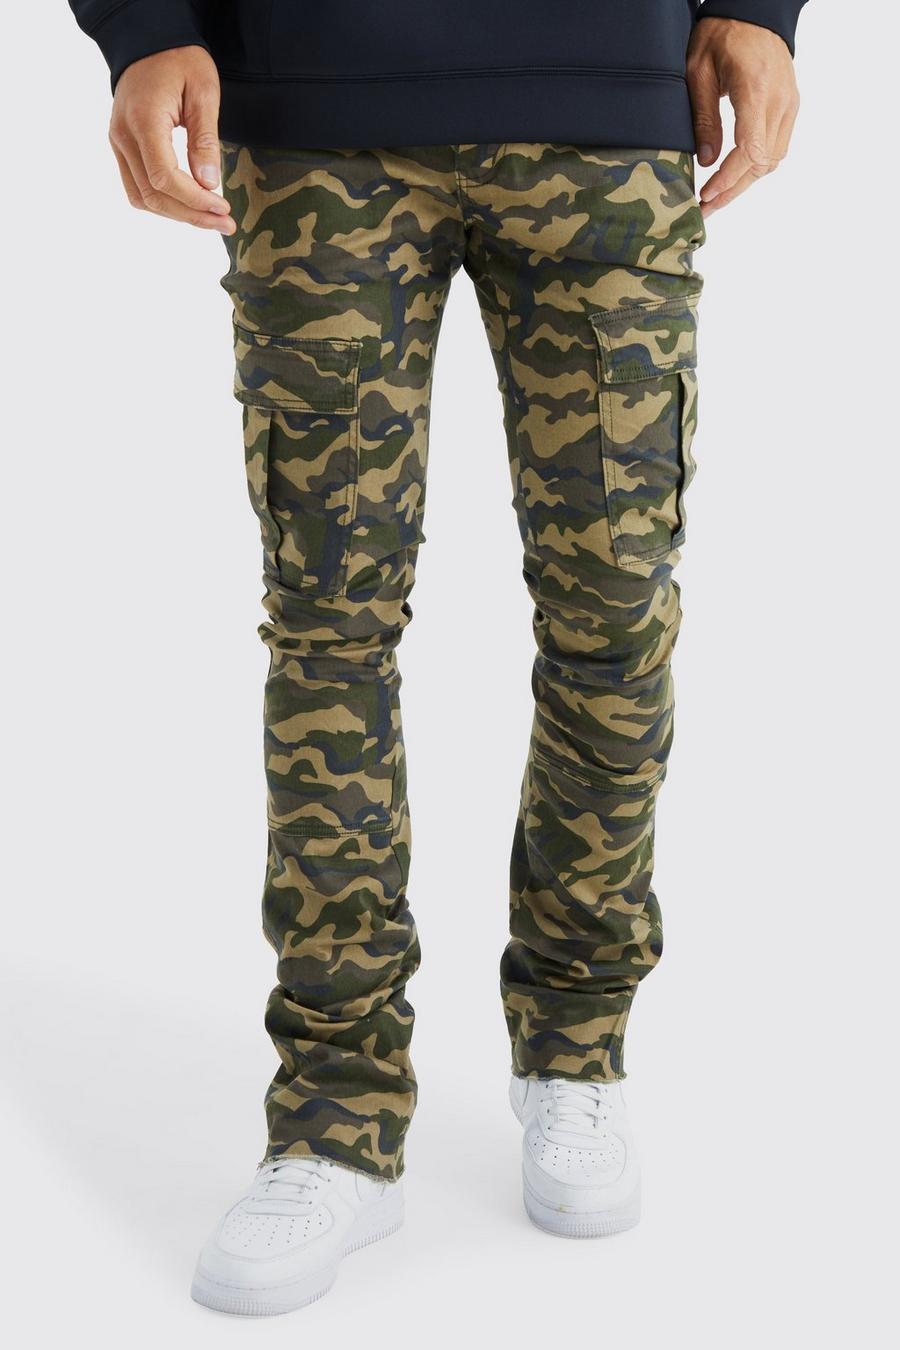 Sand Tall Skinny Stacked Flare Gusset Camo Cargo Pants